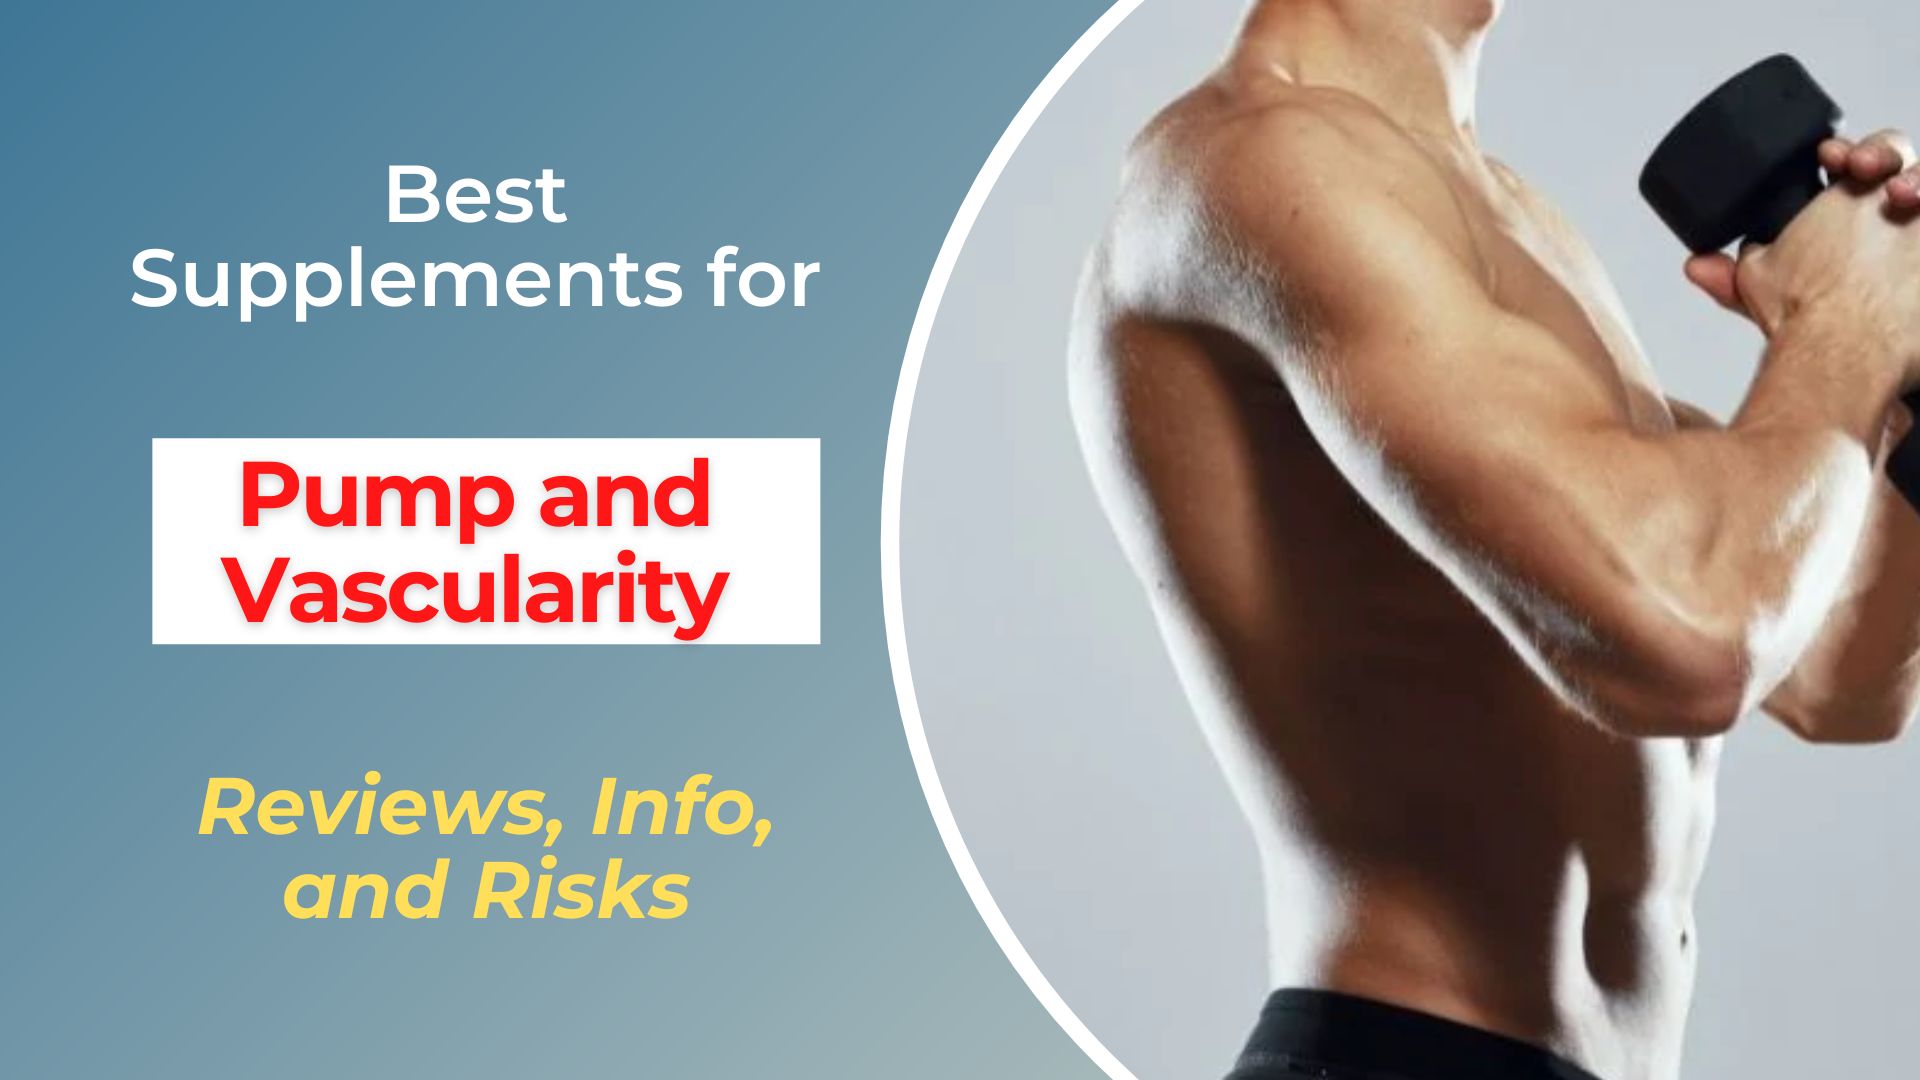 Best Supplements for Pump and Vascularity